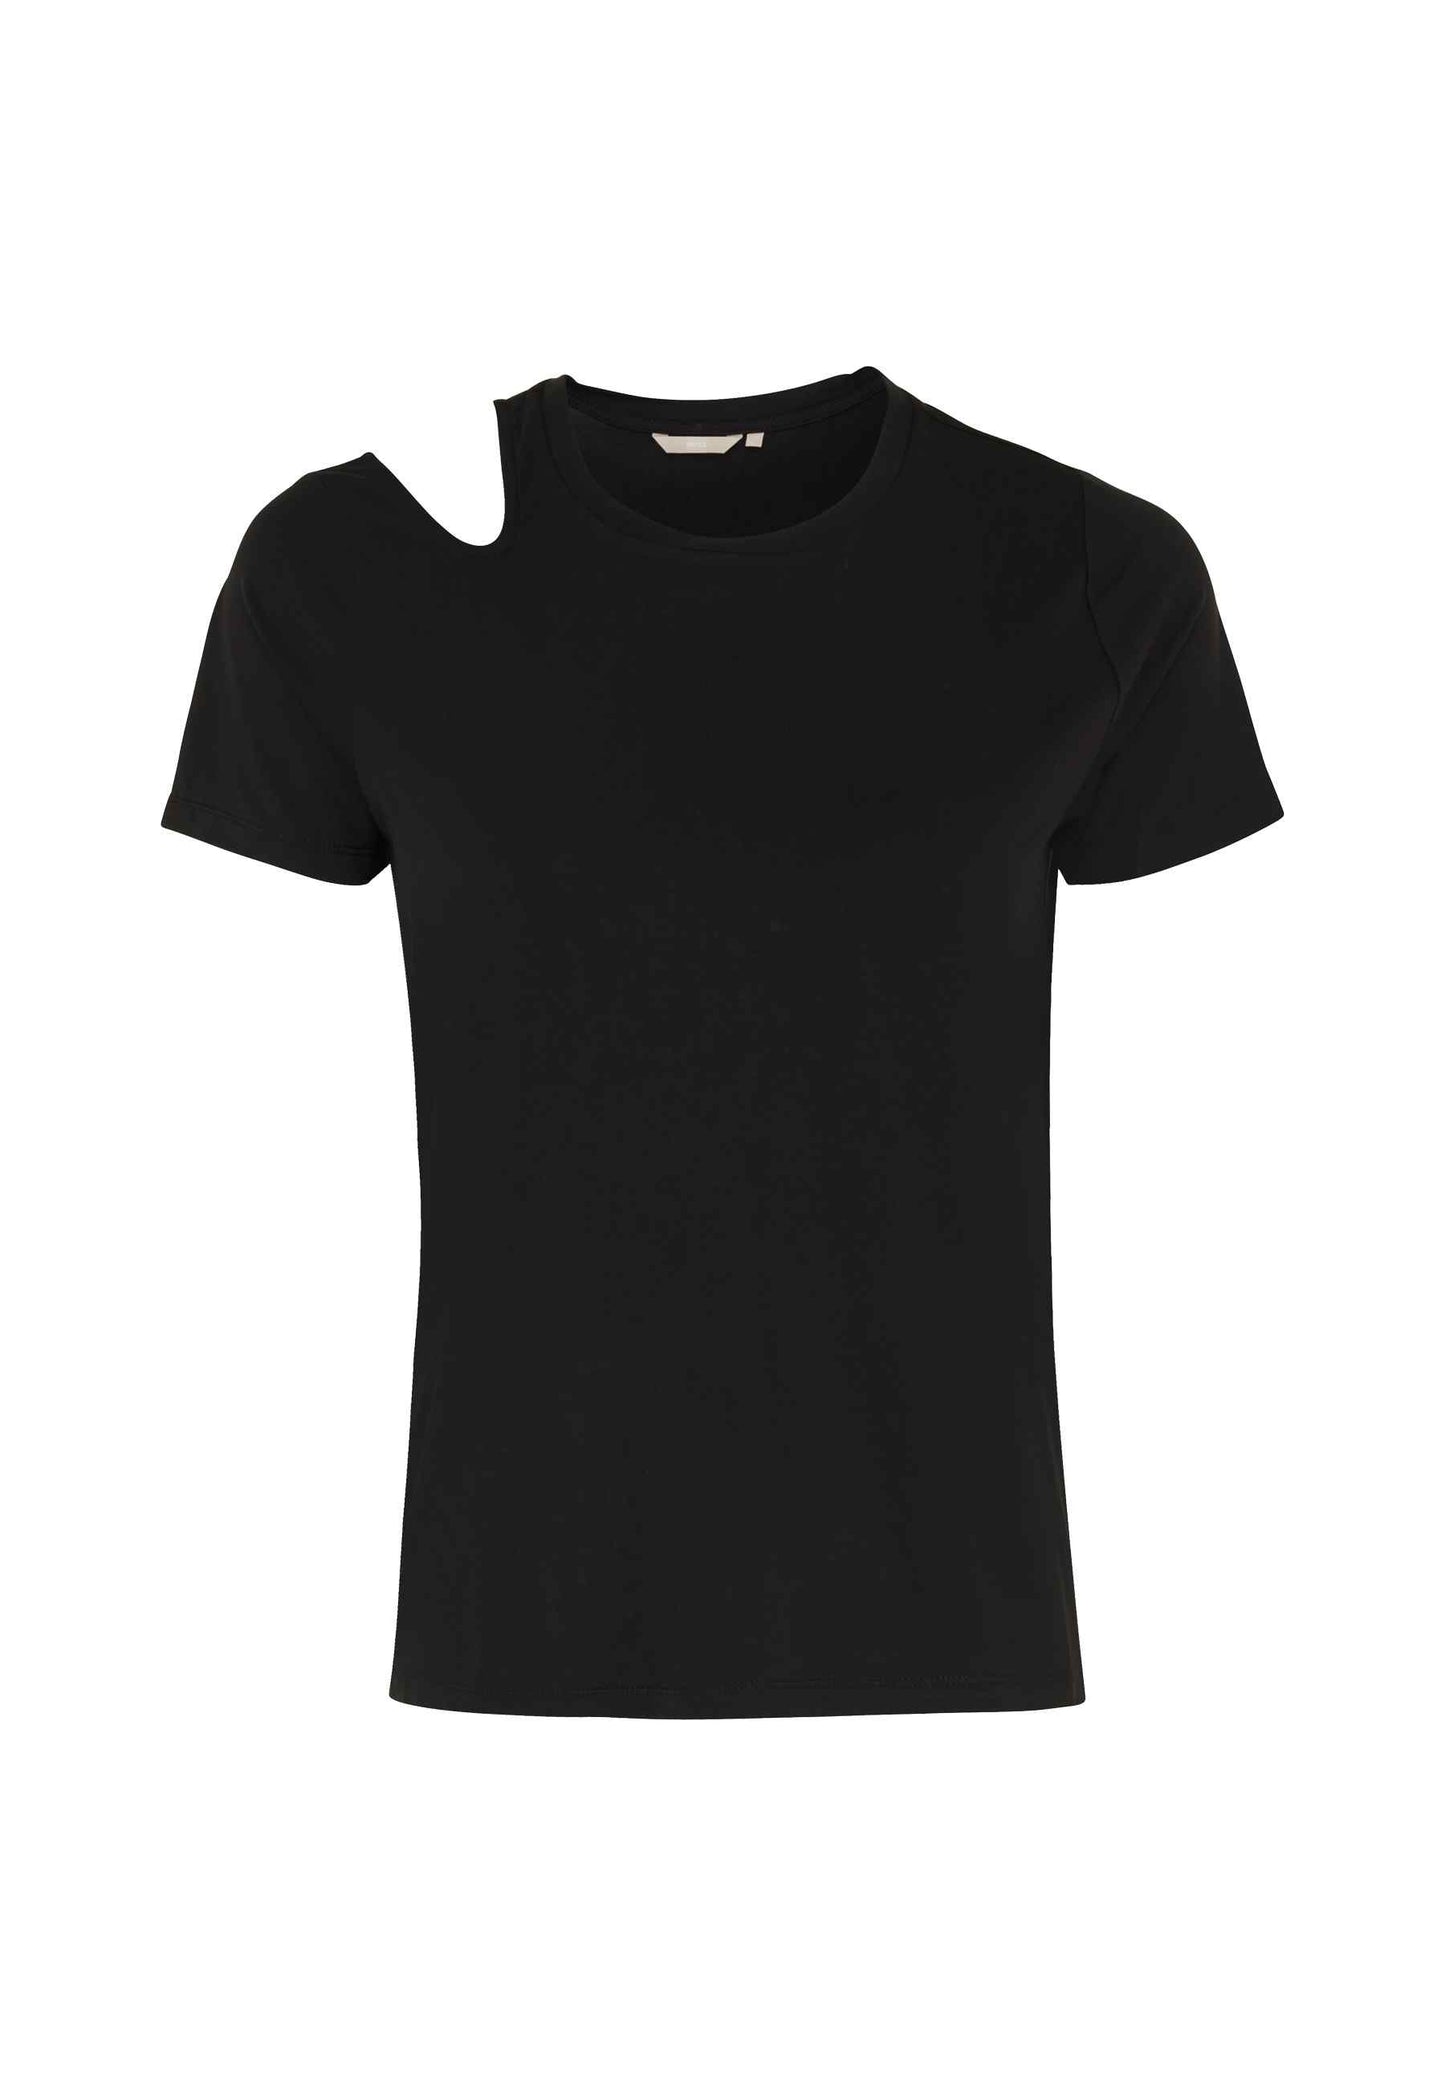 T-shirt with cut and round neck